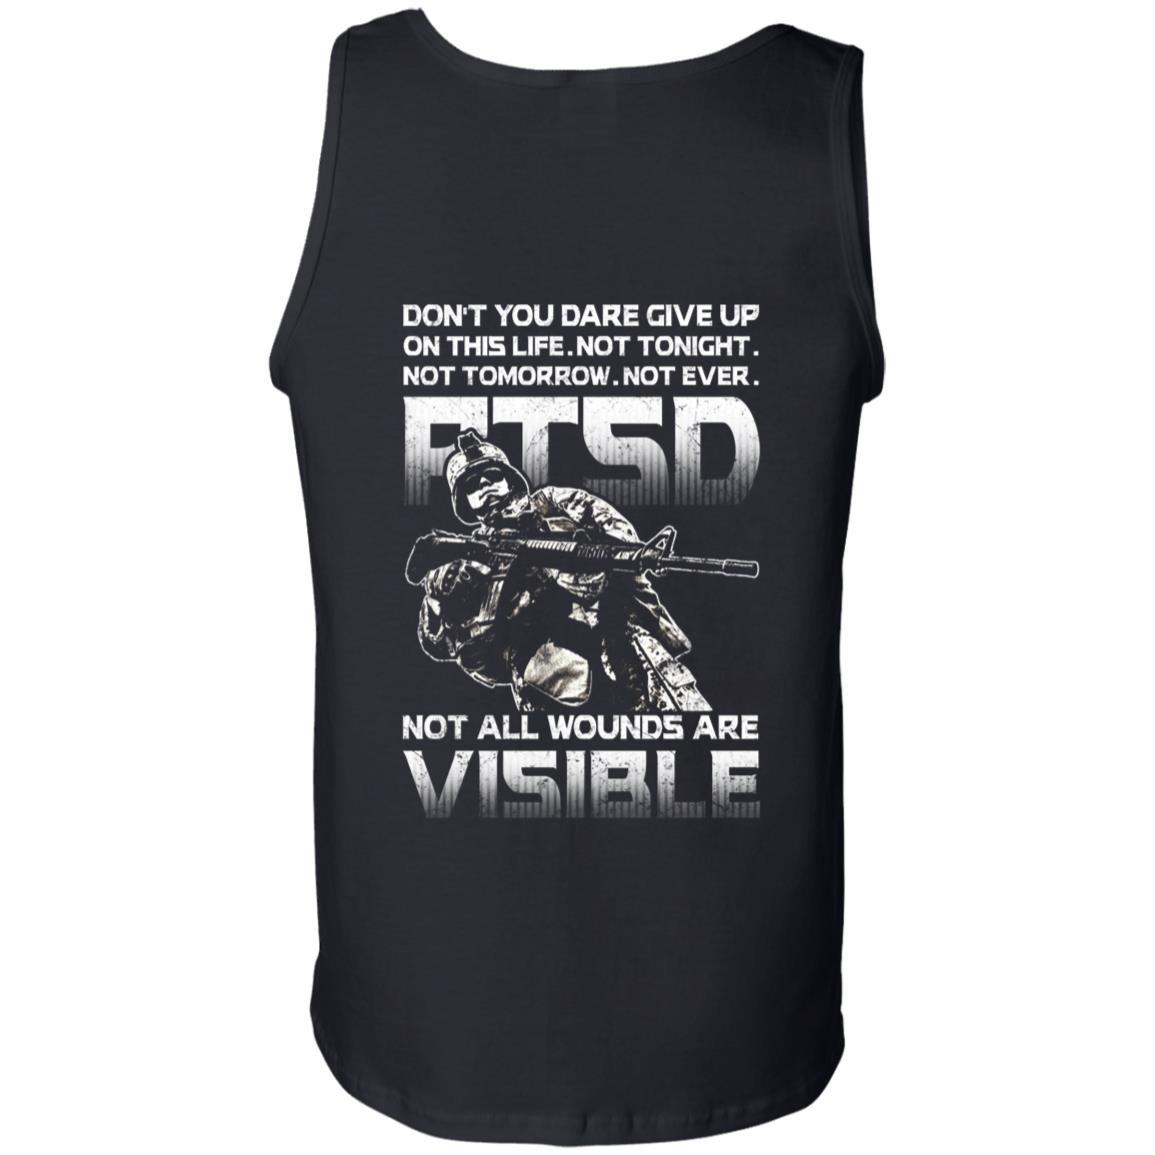 Military T-Shirt "Don't You Dare Give Up - PTSD Men" On Back-TShirt-General-Veterans Nation